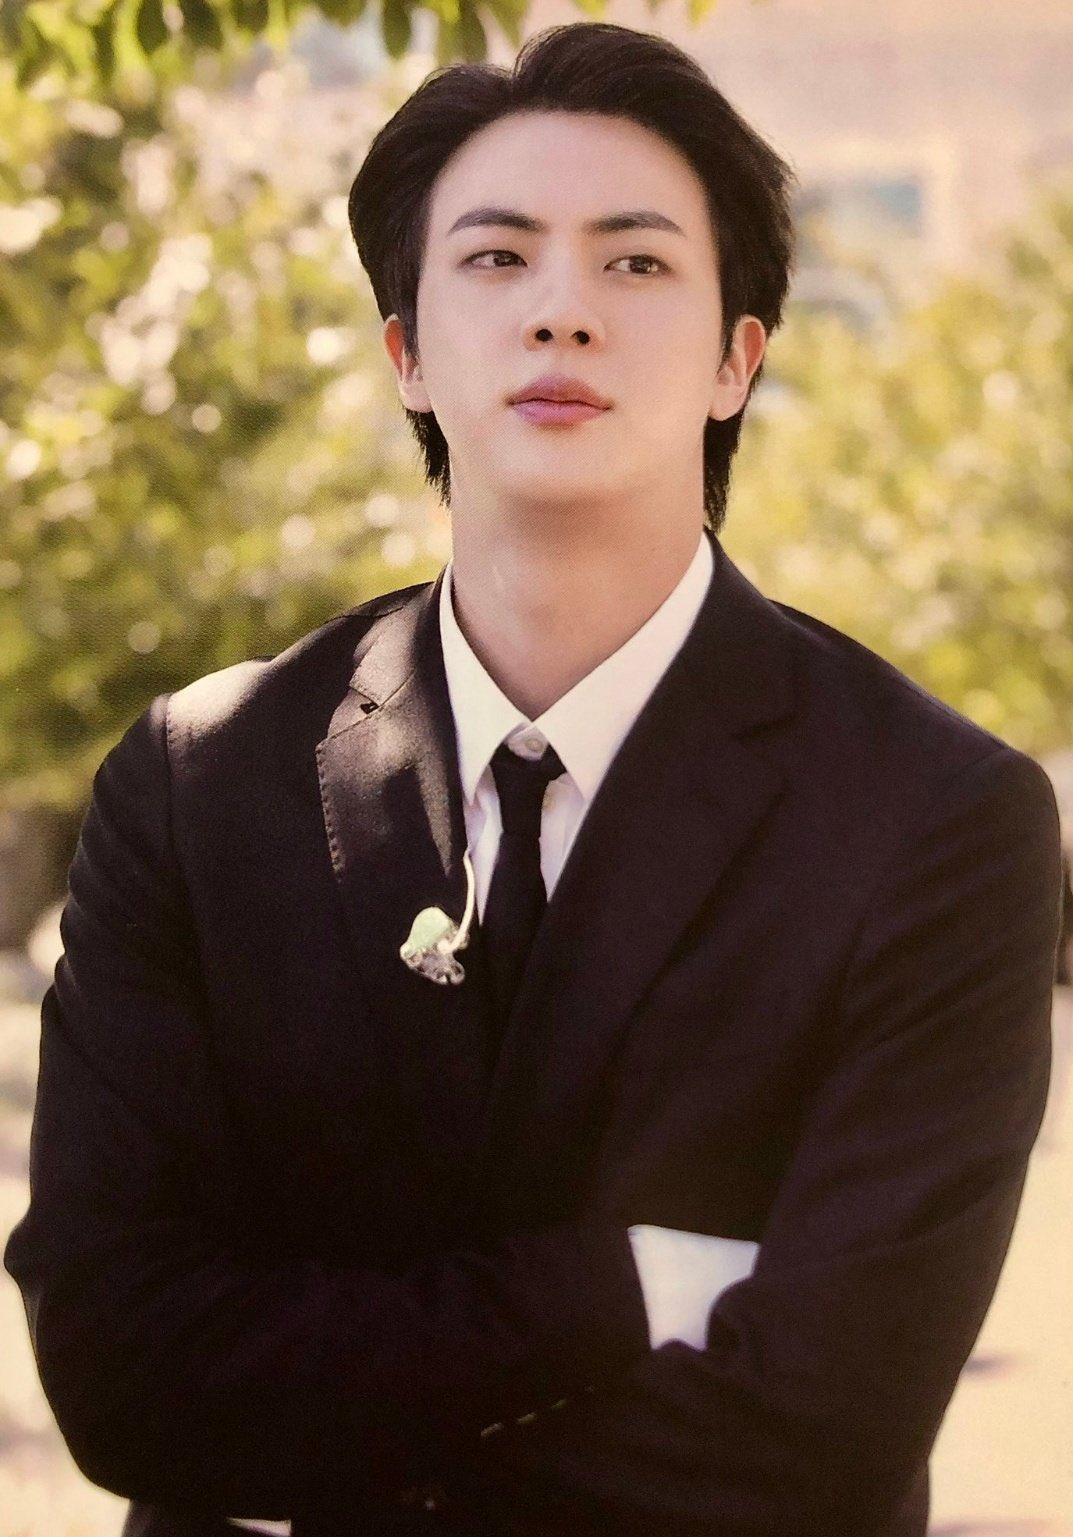 Seokjinism - THE ASTRONAUT JIN 🧑‍🚀 (Fan Account) on X: 10 things Jin  can't live without 1-Tennis bag & racket 2-Gaming Keyboard 3-Wallet  4-Good day pajamas 5 Cellphone 6-Louis Vuitton bag 7-Maplestory